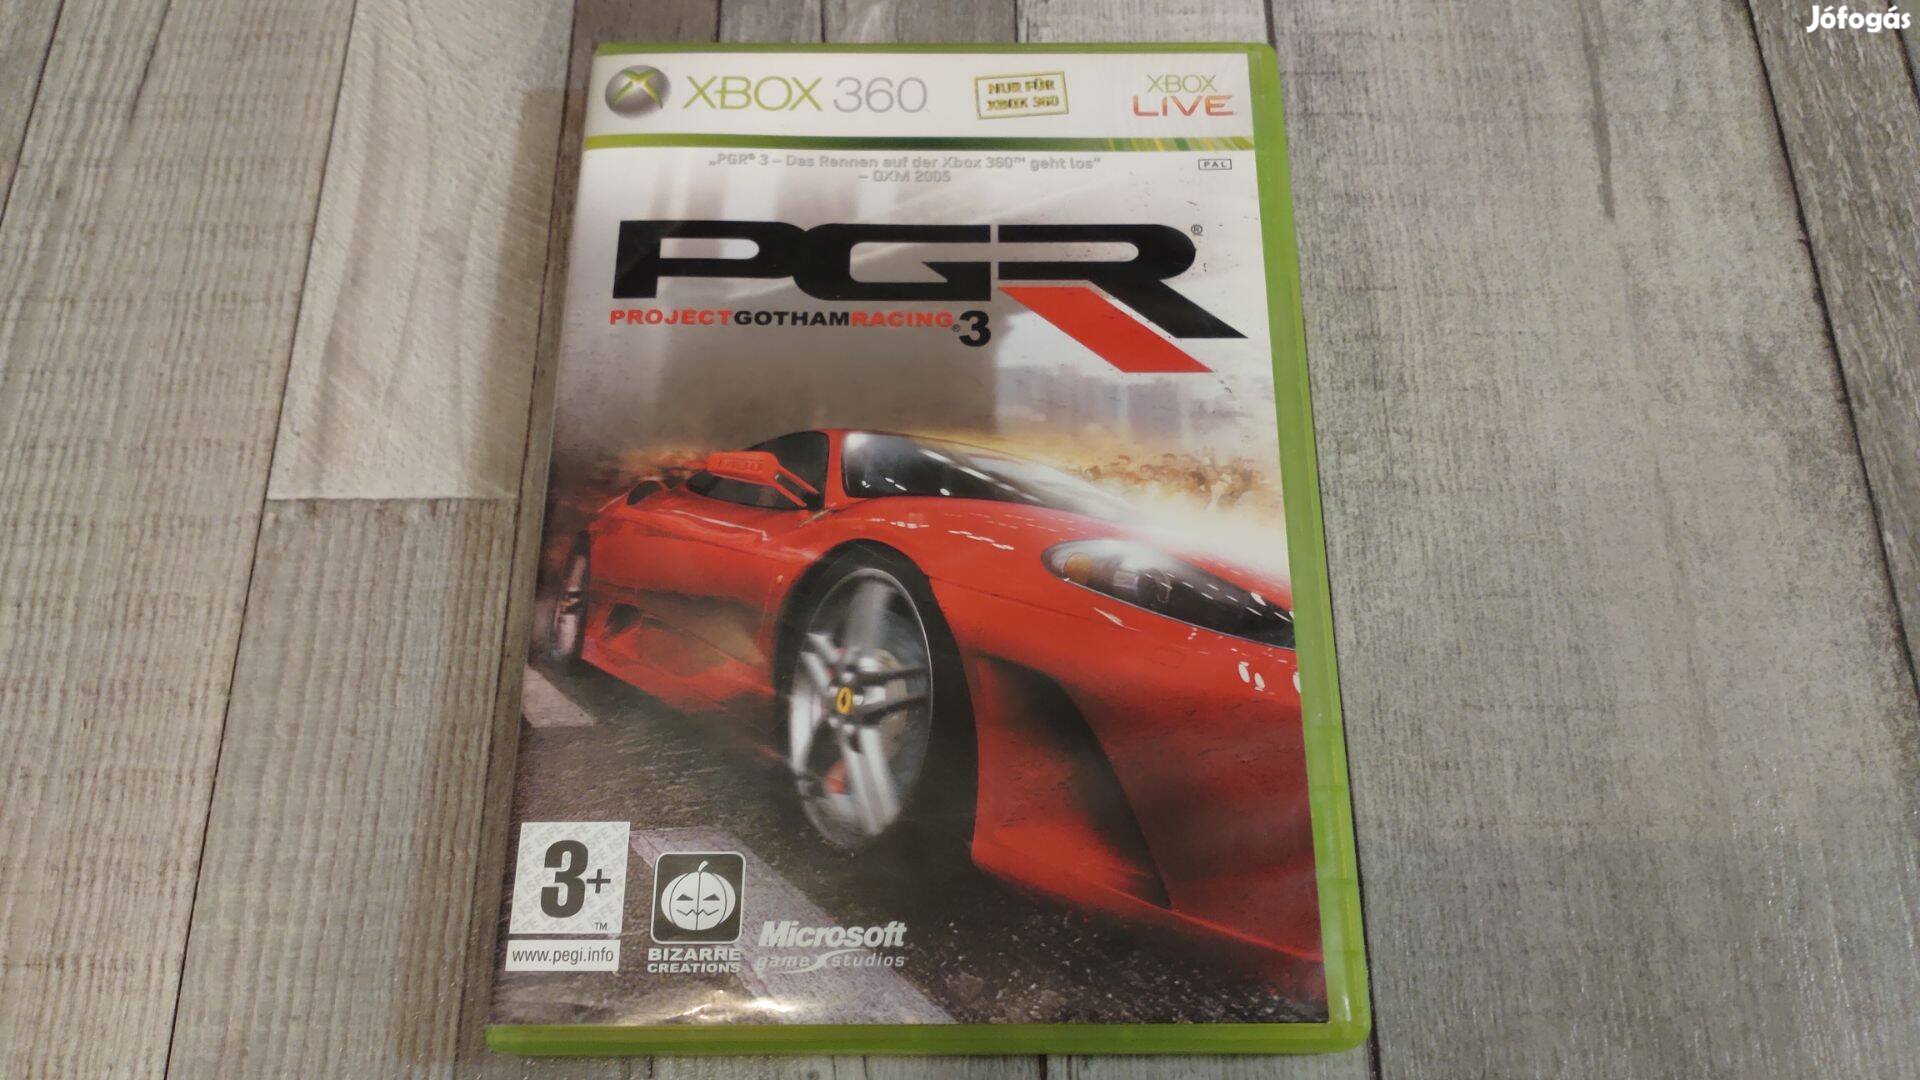 Top Xbox 360 : Project Gotham Racing 3 PGR 3